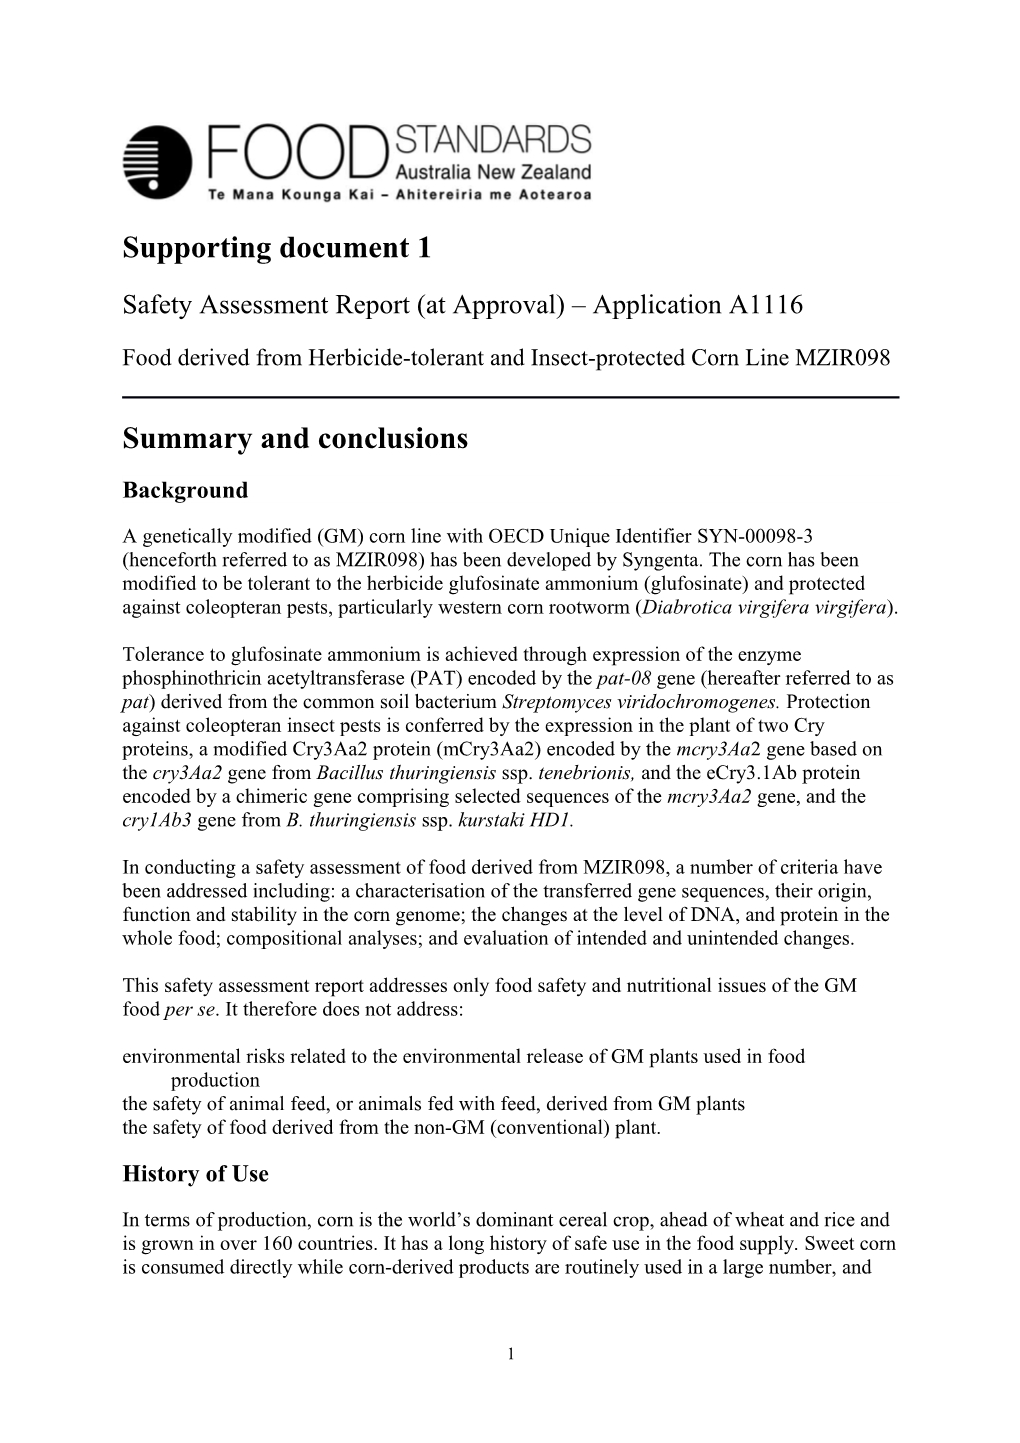 Supporting Document 1 s11